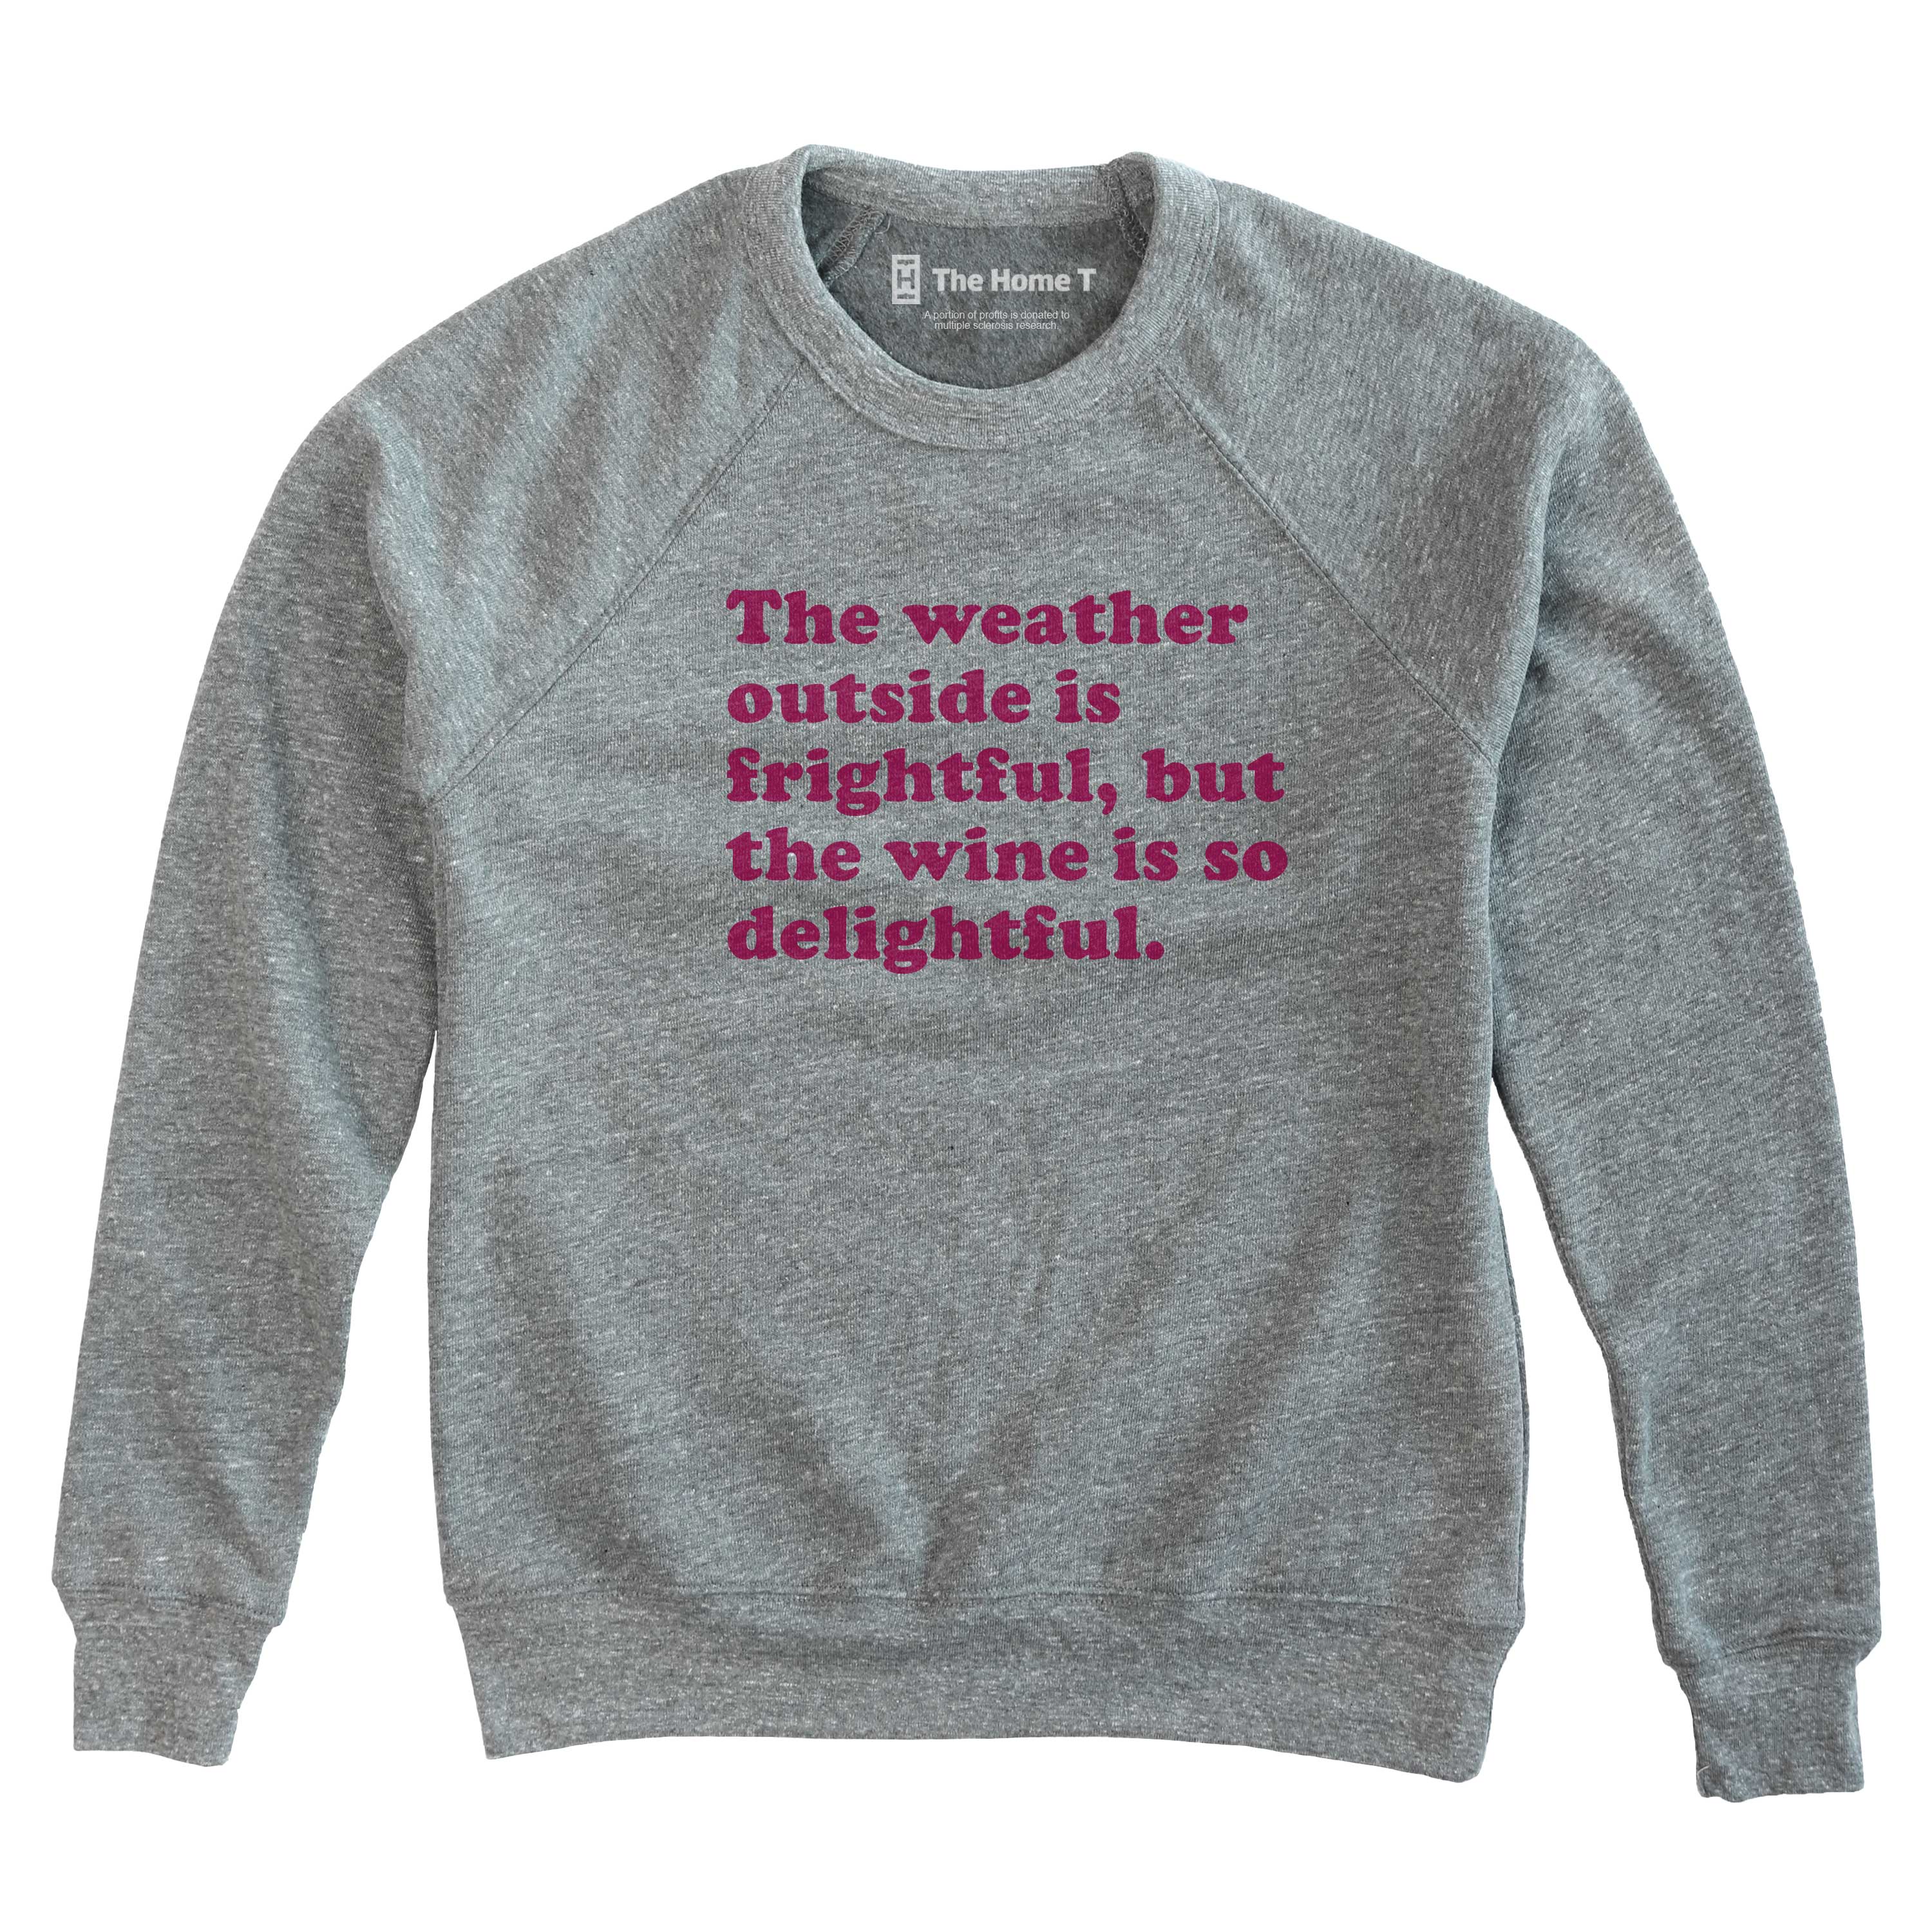 The Weather Outside is Frightful The Home T XS Sweatshirt